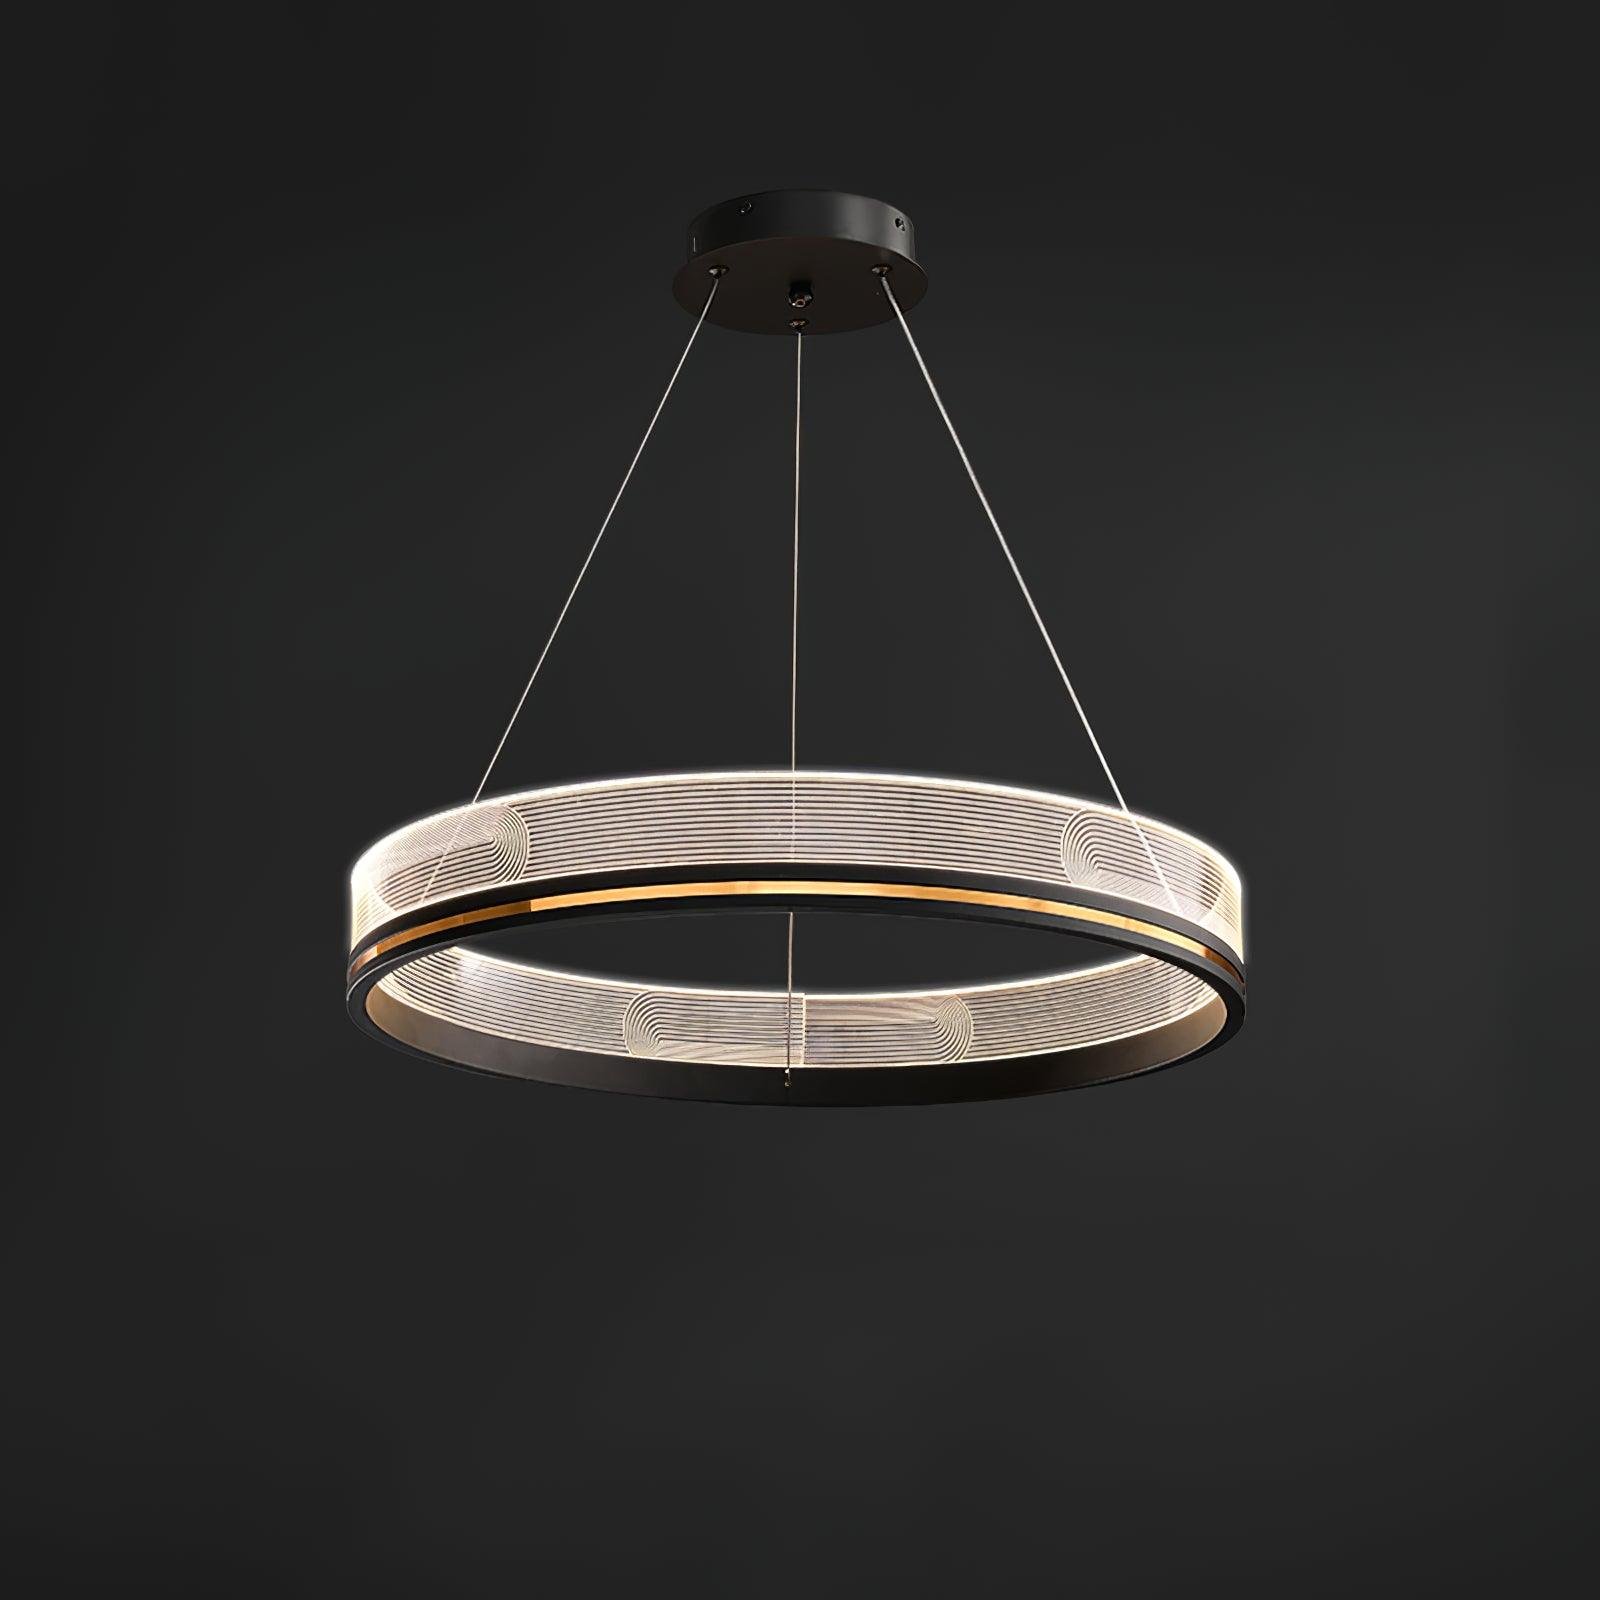 Black Sendra Chandelier with Cool White Lighting, measuring approximately 31.4″ in diameter and 27.5″ in height (or 80cm in diameter and 70cm in height).